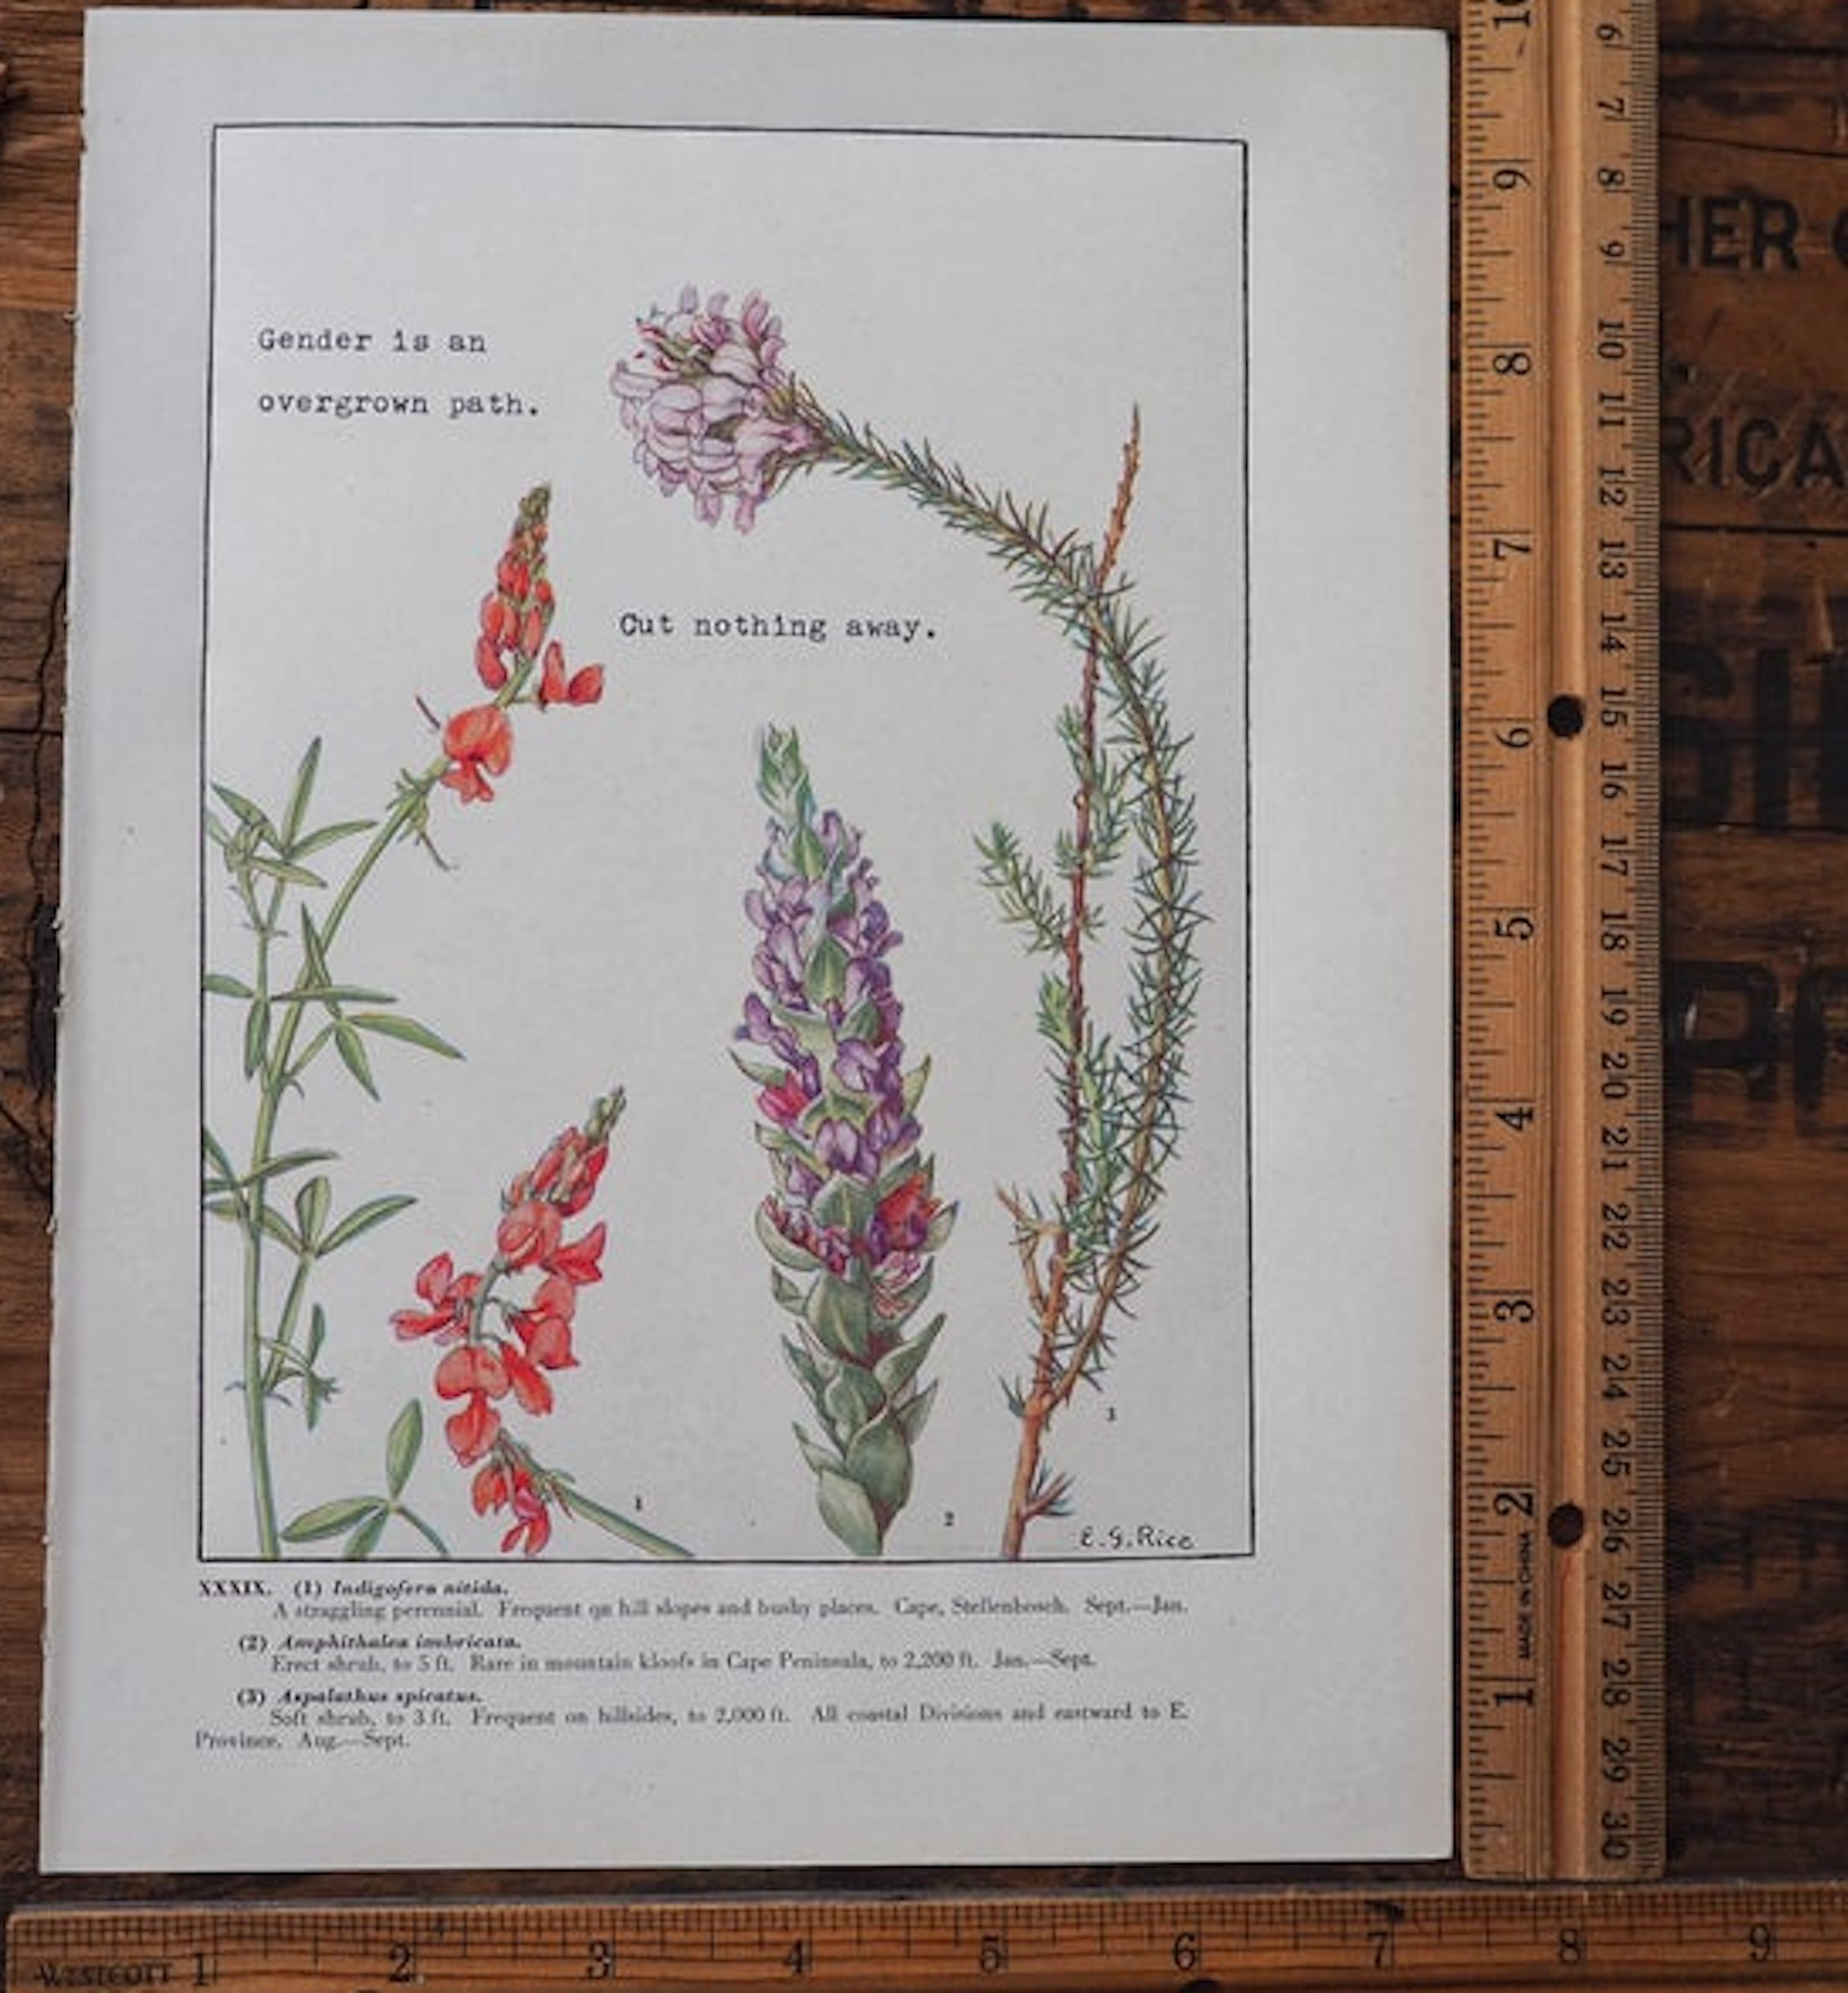 Vintage botanical print with typewritten poetry from Sycamore Type Shop